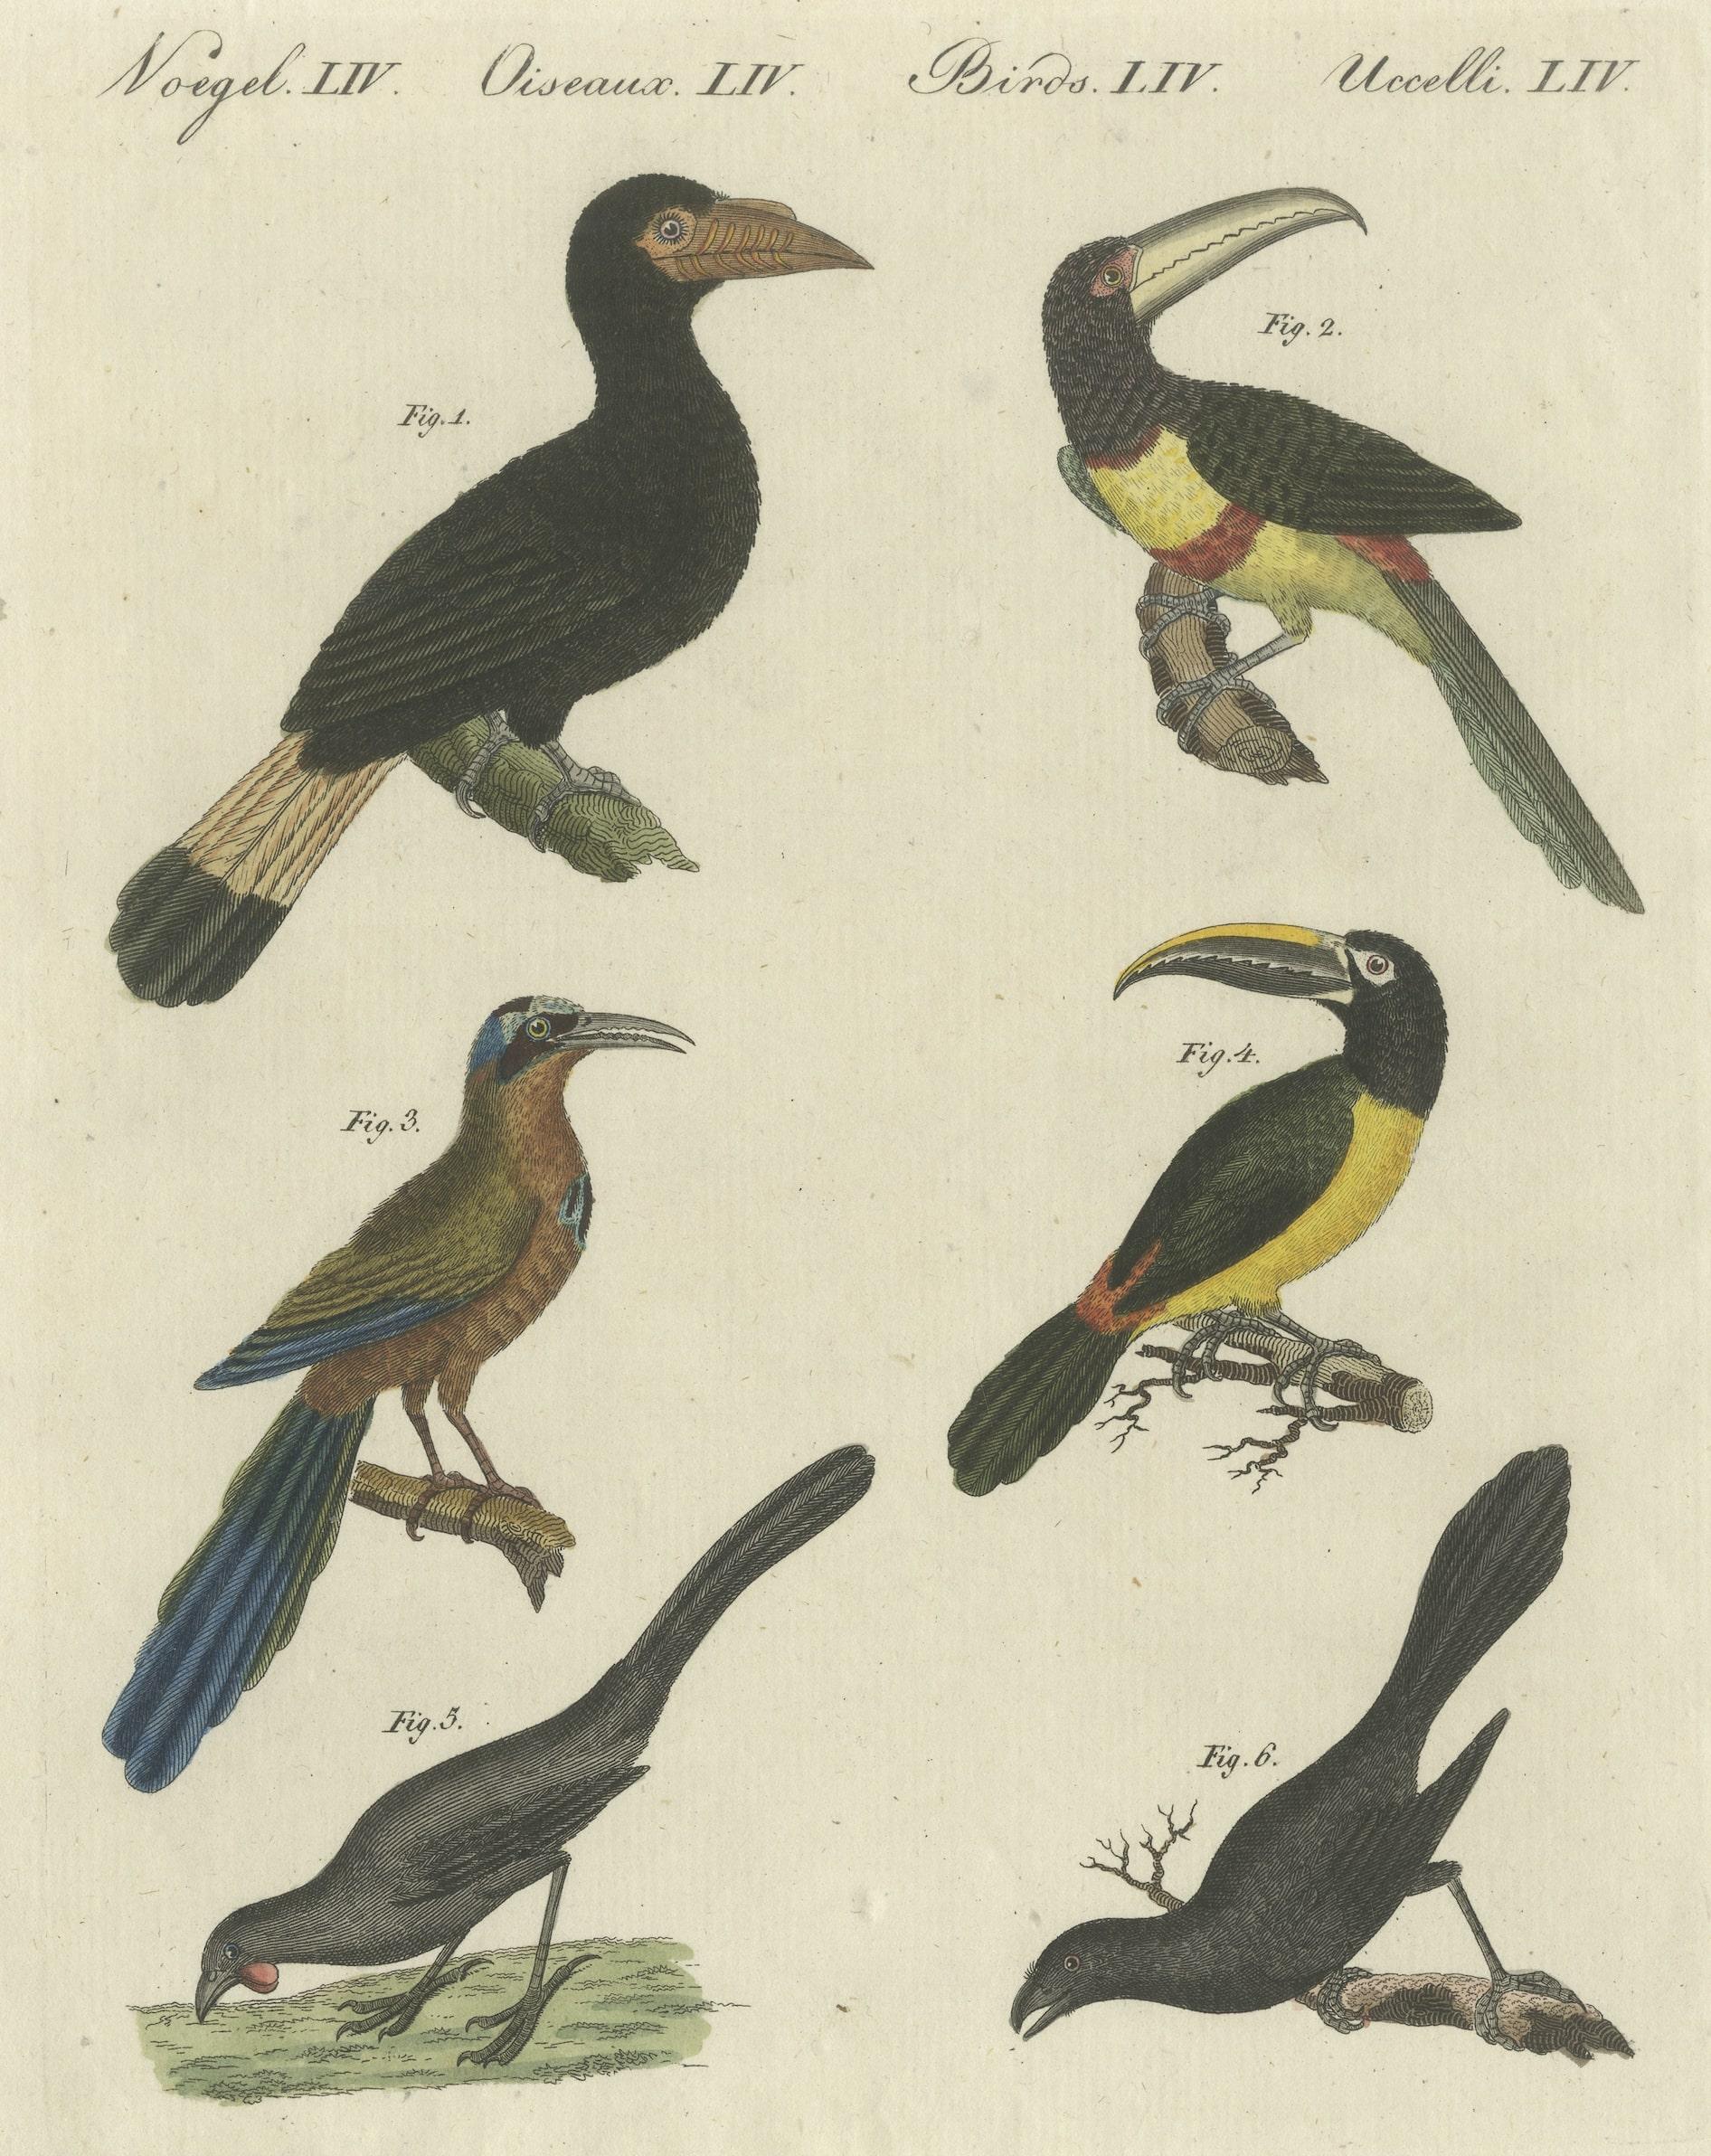 Original antique print of various birds including the Aracari toucan and others. This print originates from 'Bilderbuch fur Kinder' by F.J. Bertuch. Friedrich Johann Bertuch (1747-1822) was a German publisher and man of arts most famous for his